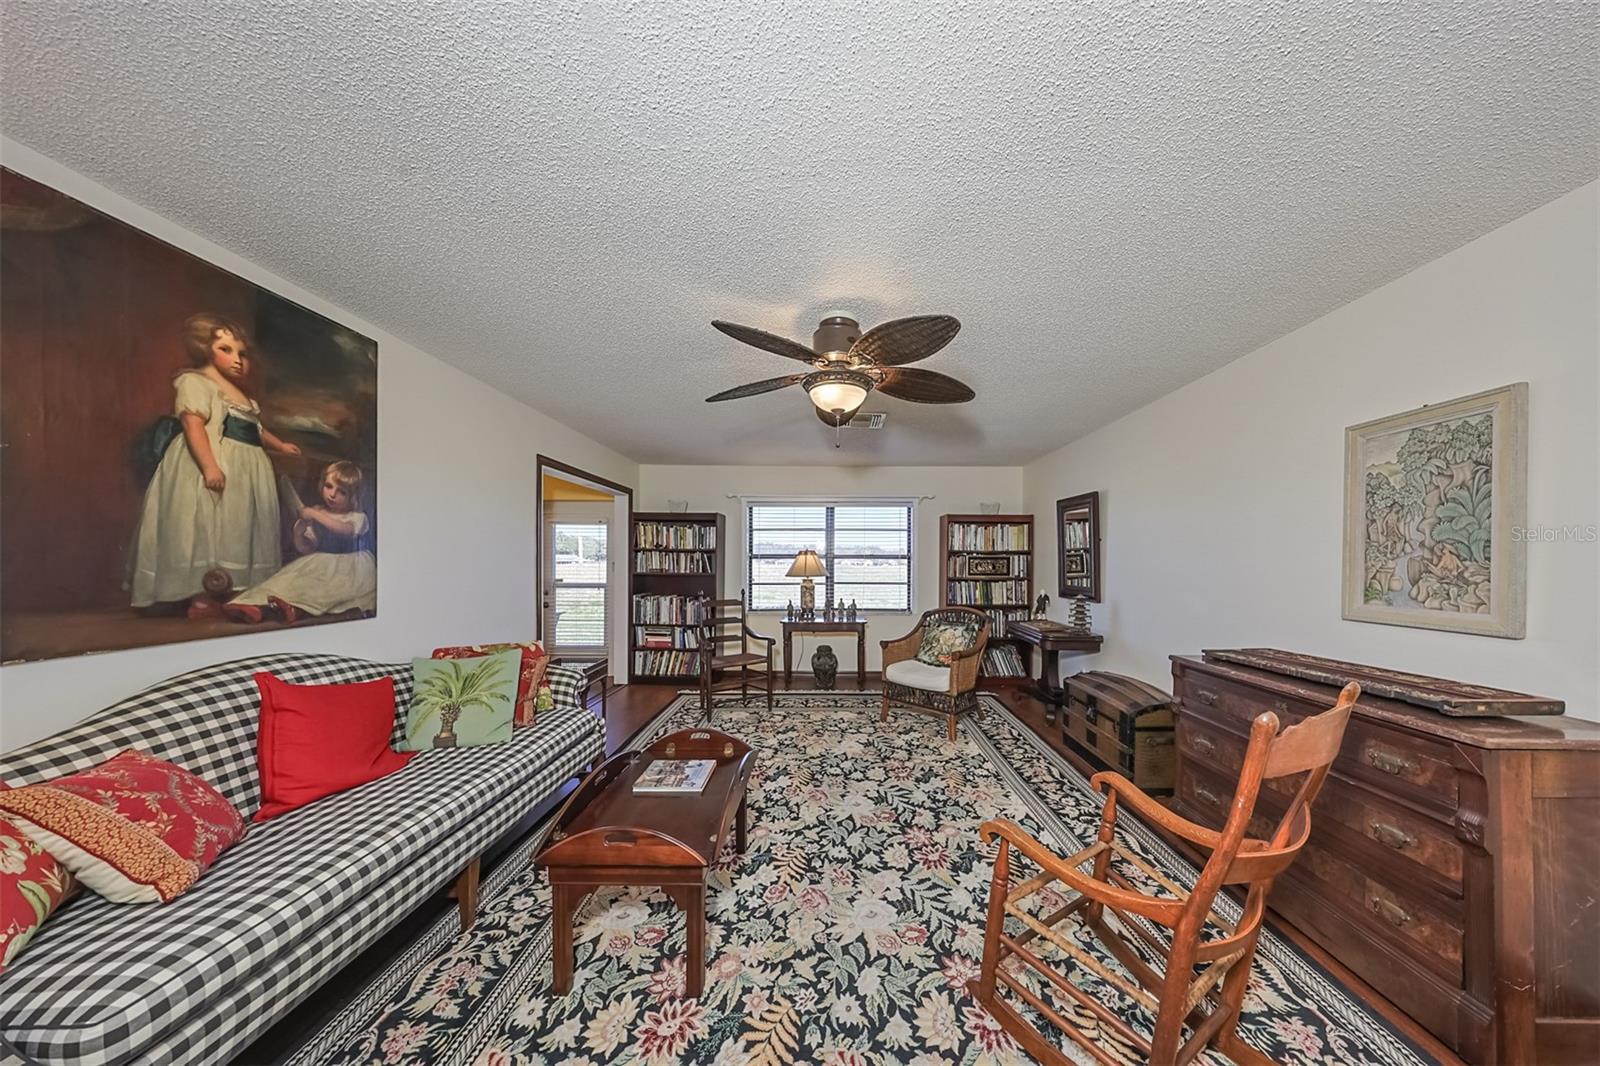 Living Room is large and spacious with easy access to the Florida room and dining room.